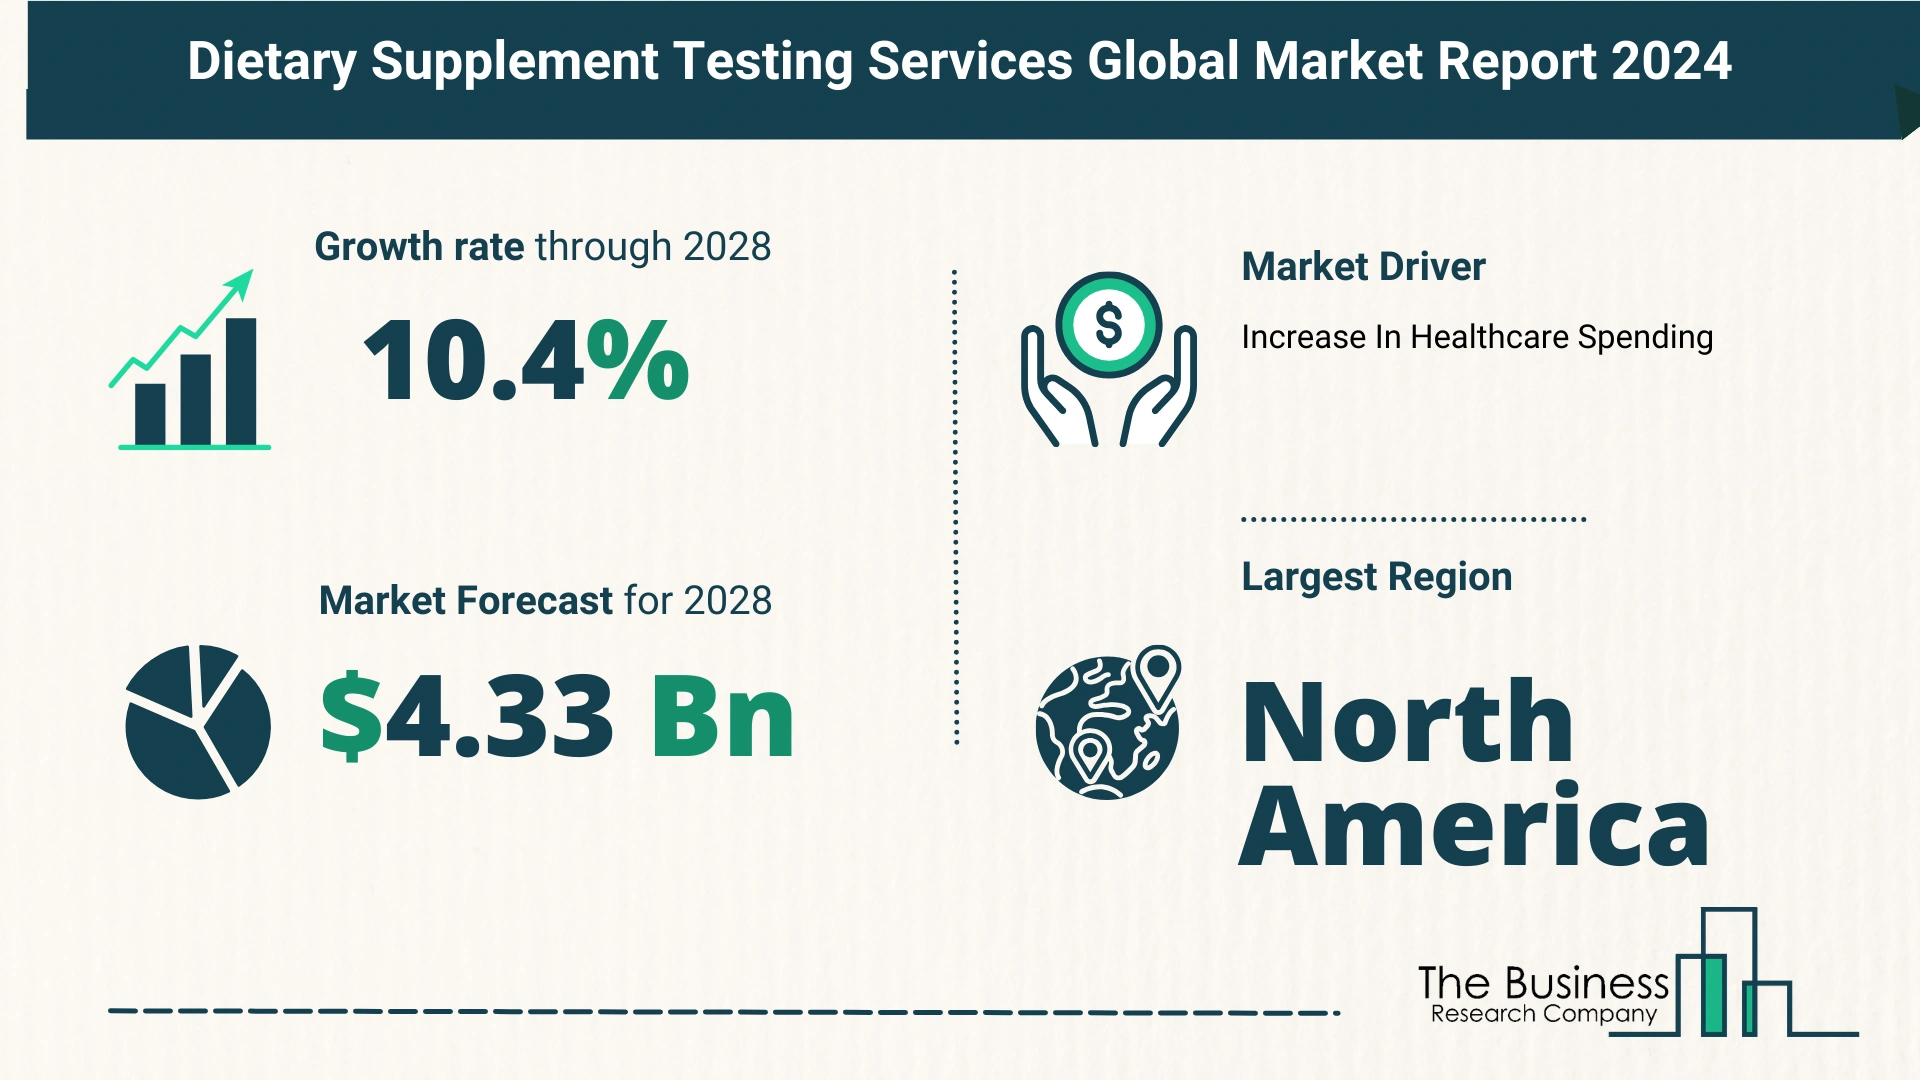 Global Dietary Supplement Testing Services Market